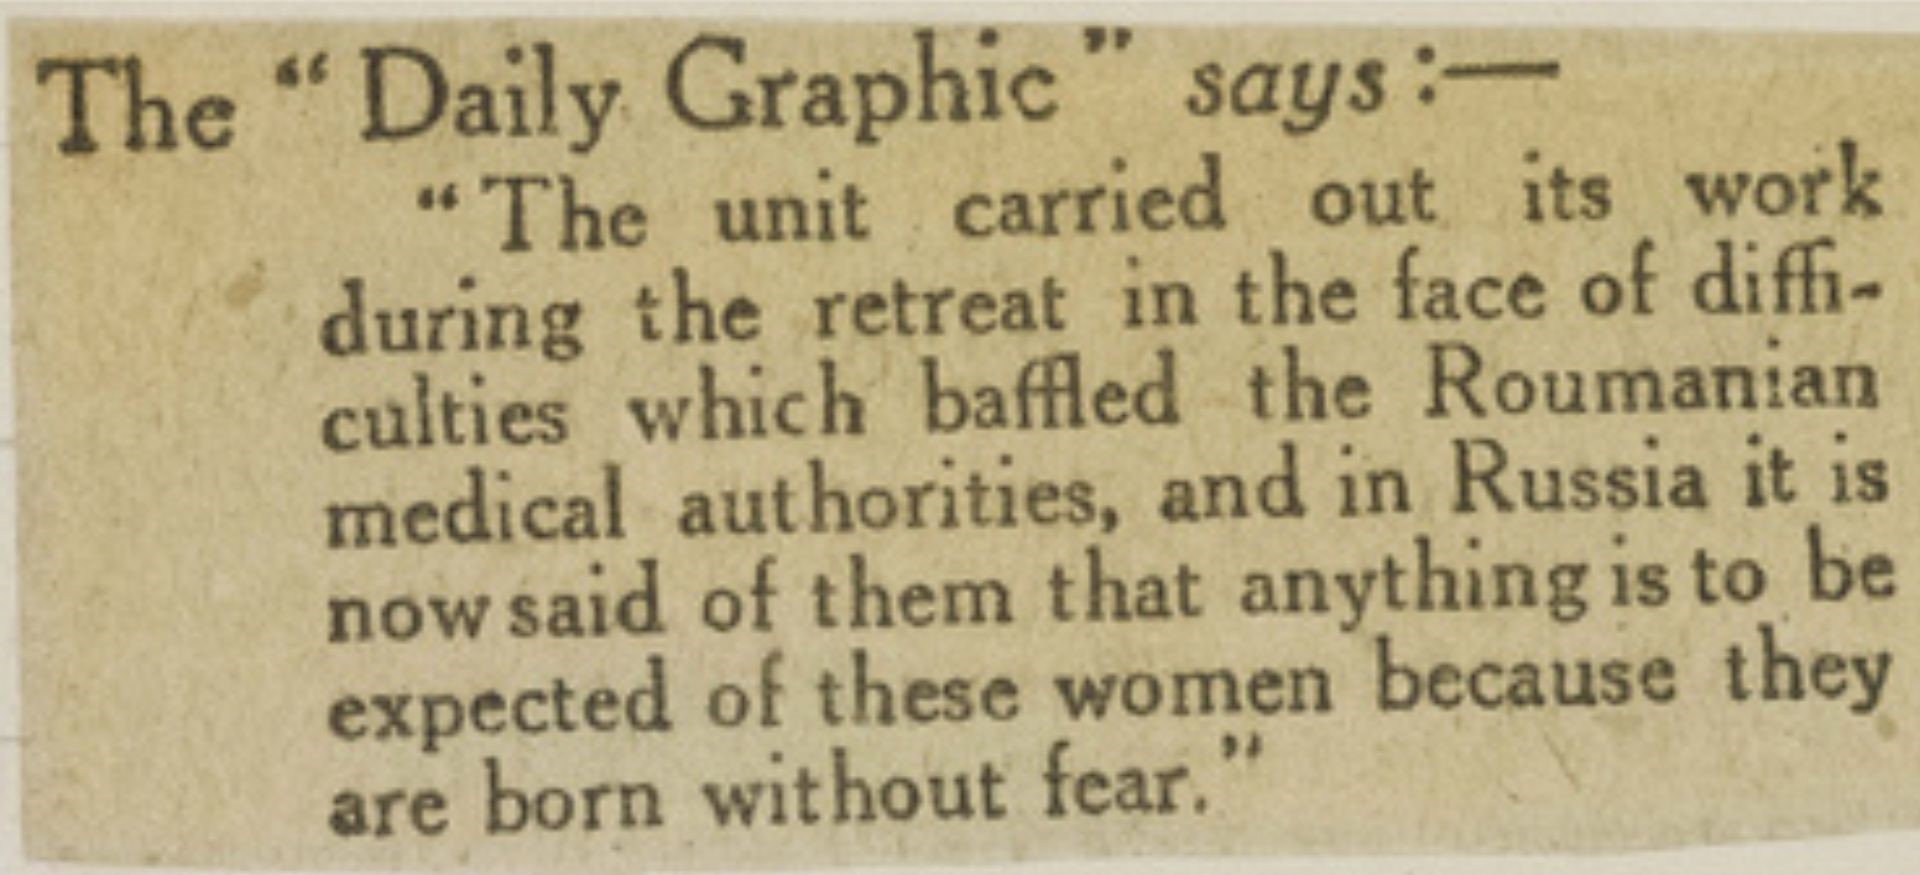 A cutting from the Daily Graphic newspaper describing the fearlessness of the women in the Scottish Women’s Hospitals during World War I.